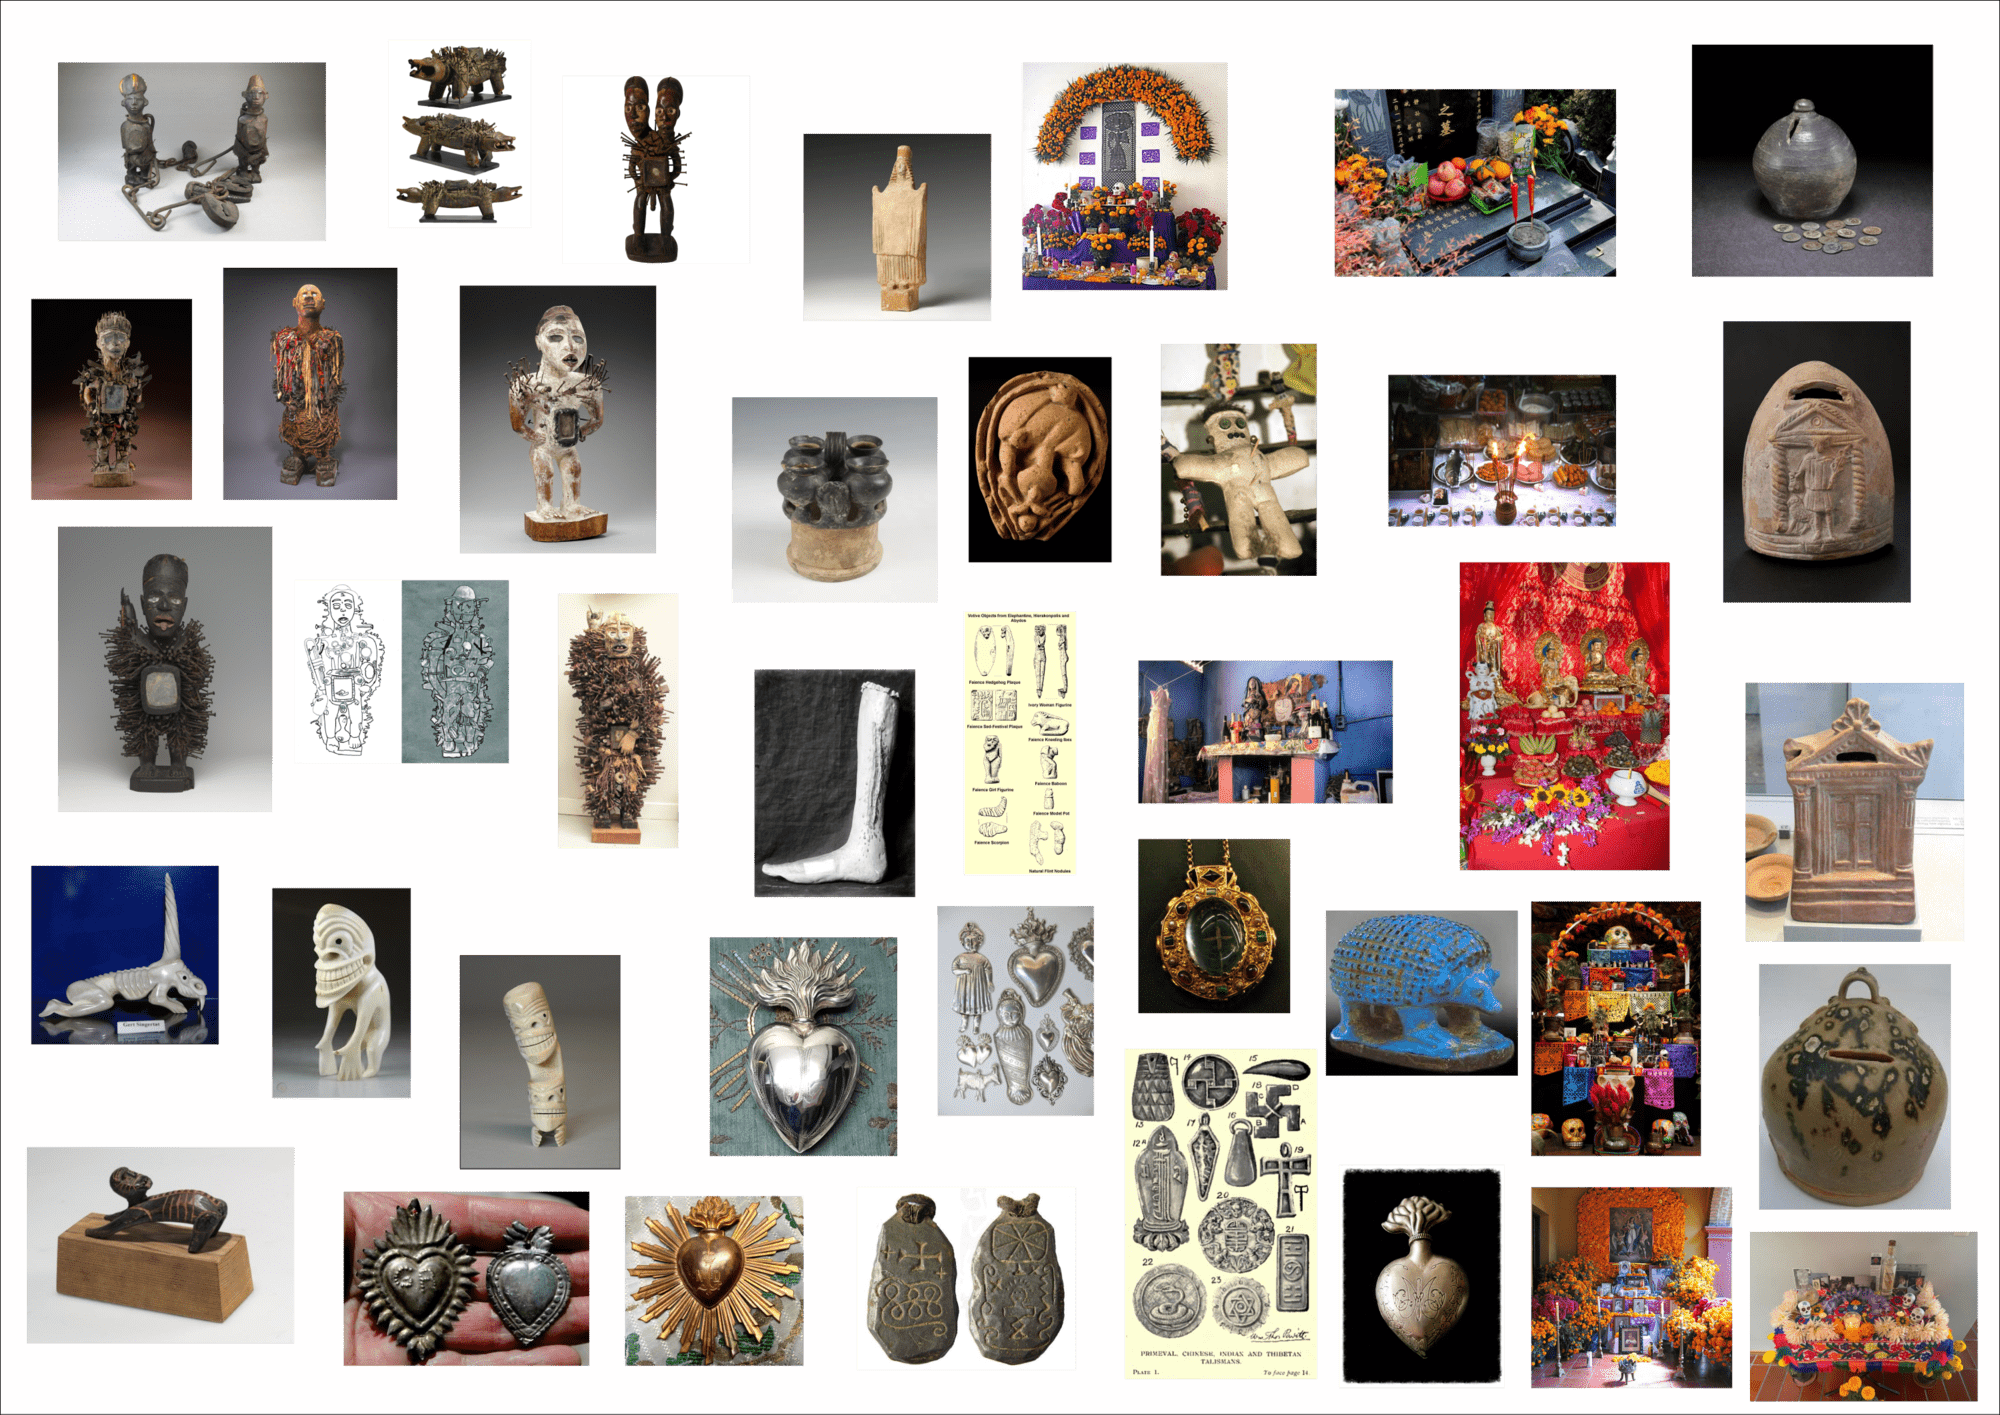 A collage of ceremonial items, including amulets, charms, and vessels, from various cultures and religions